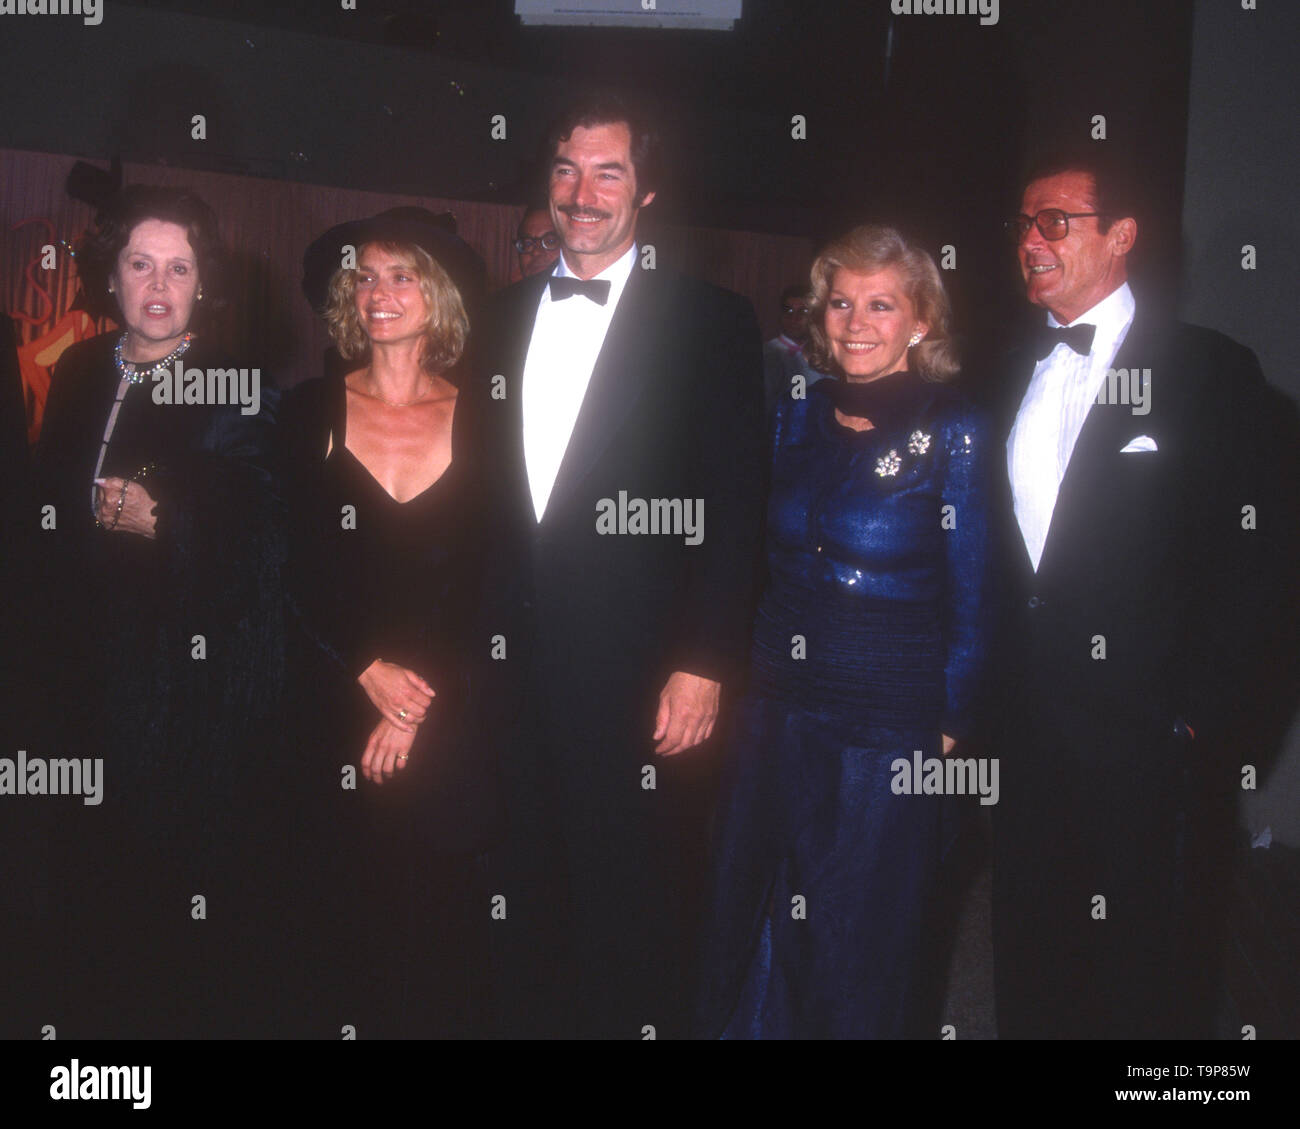 Westwood, California, USA 19th April 1994  Dana Broccoli, actress Maryam d'Abo, actor Timothy Dalton, Luisa MAttioli actor Roger Moore attend 70th Birthday Party for Henry Mancini on April 19, 1994 at Pauley Pavilion at UCLA in Westwood, California, USA. Photo by Barry King/Alamy Stock Photo Stock Photo